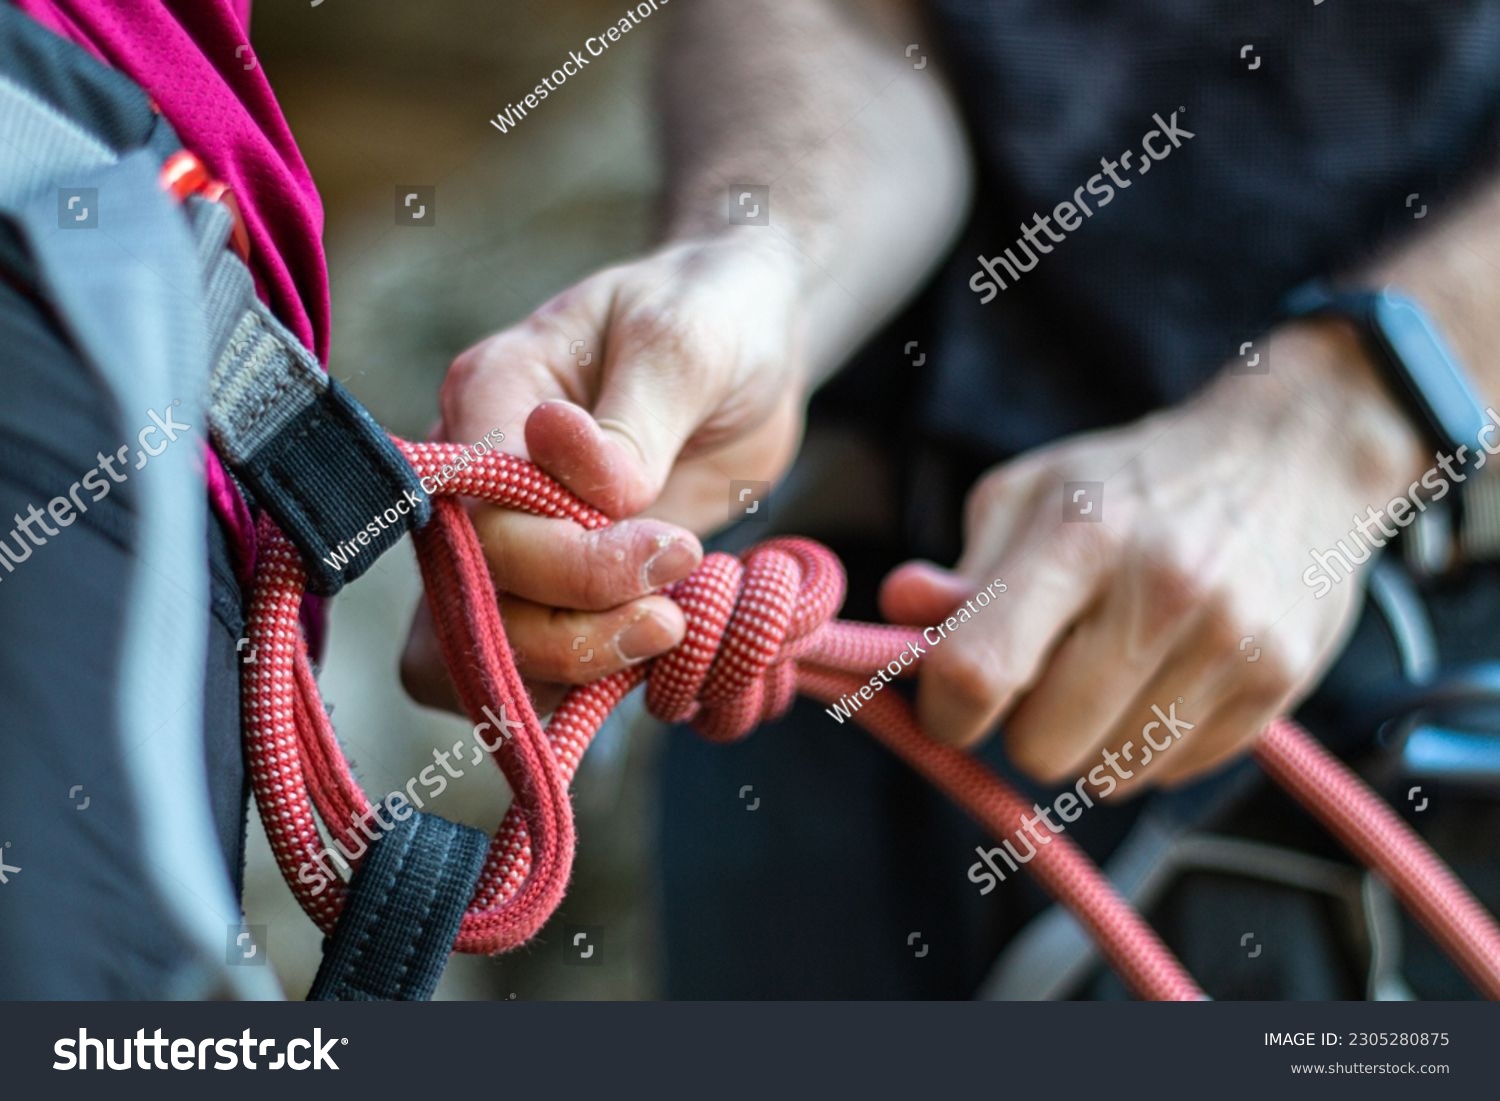 An alpinist tying a rope on his climbing equipment #2305280875